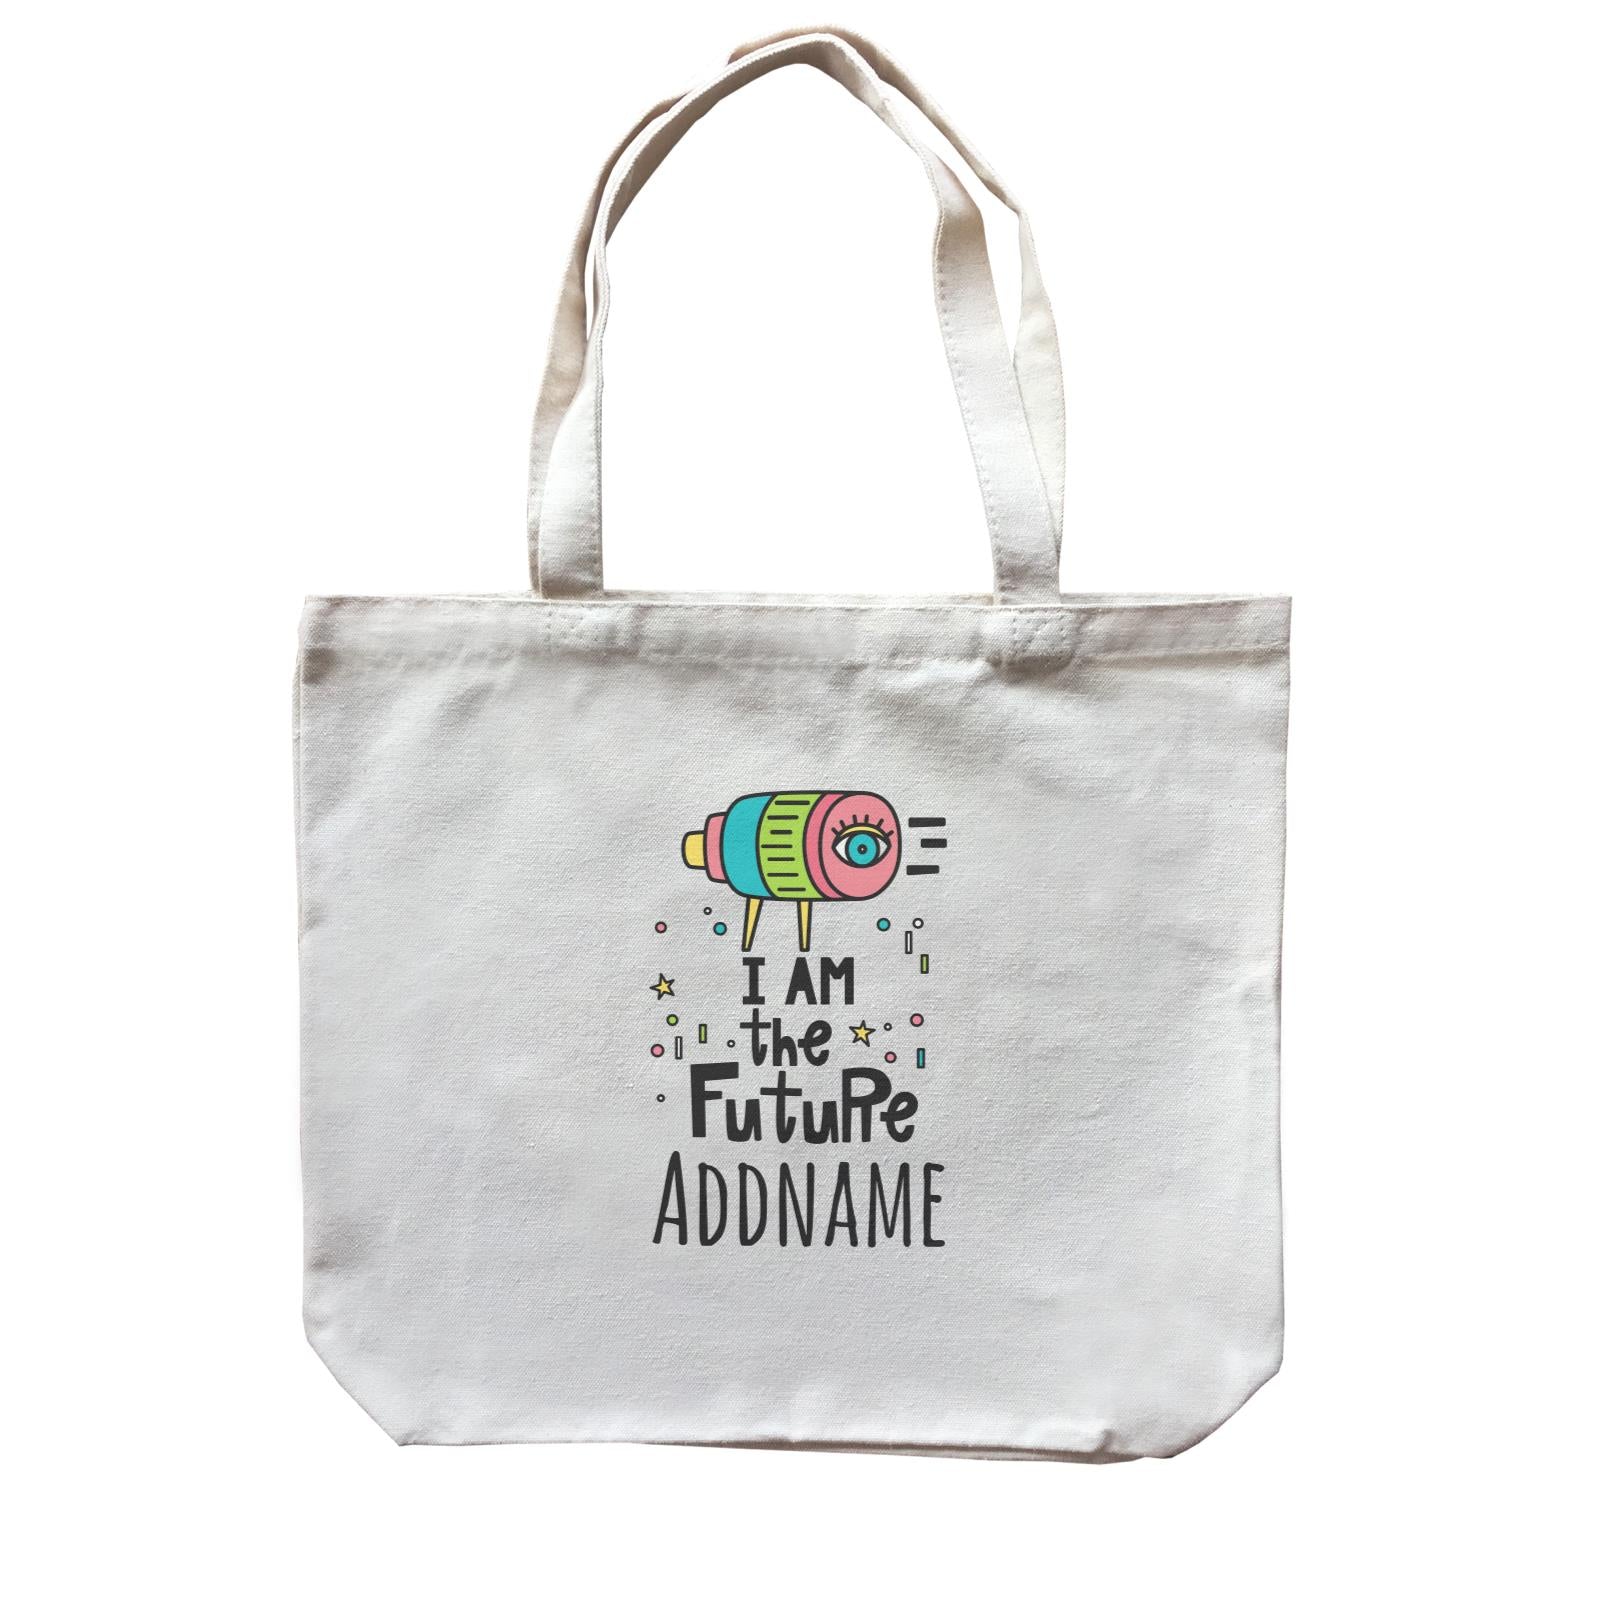 Drawn Baby Elements I Am The Future Addname Canvas Bag